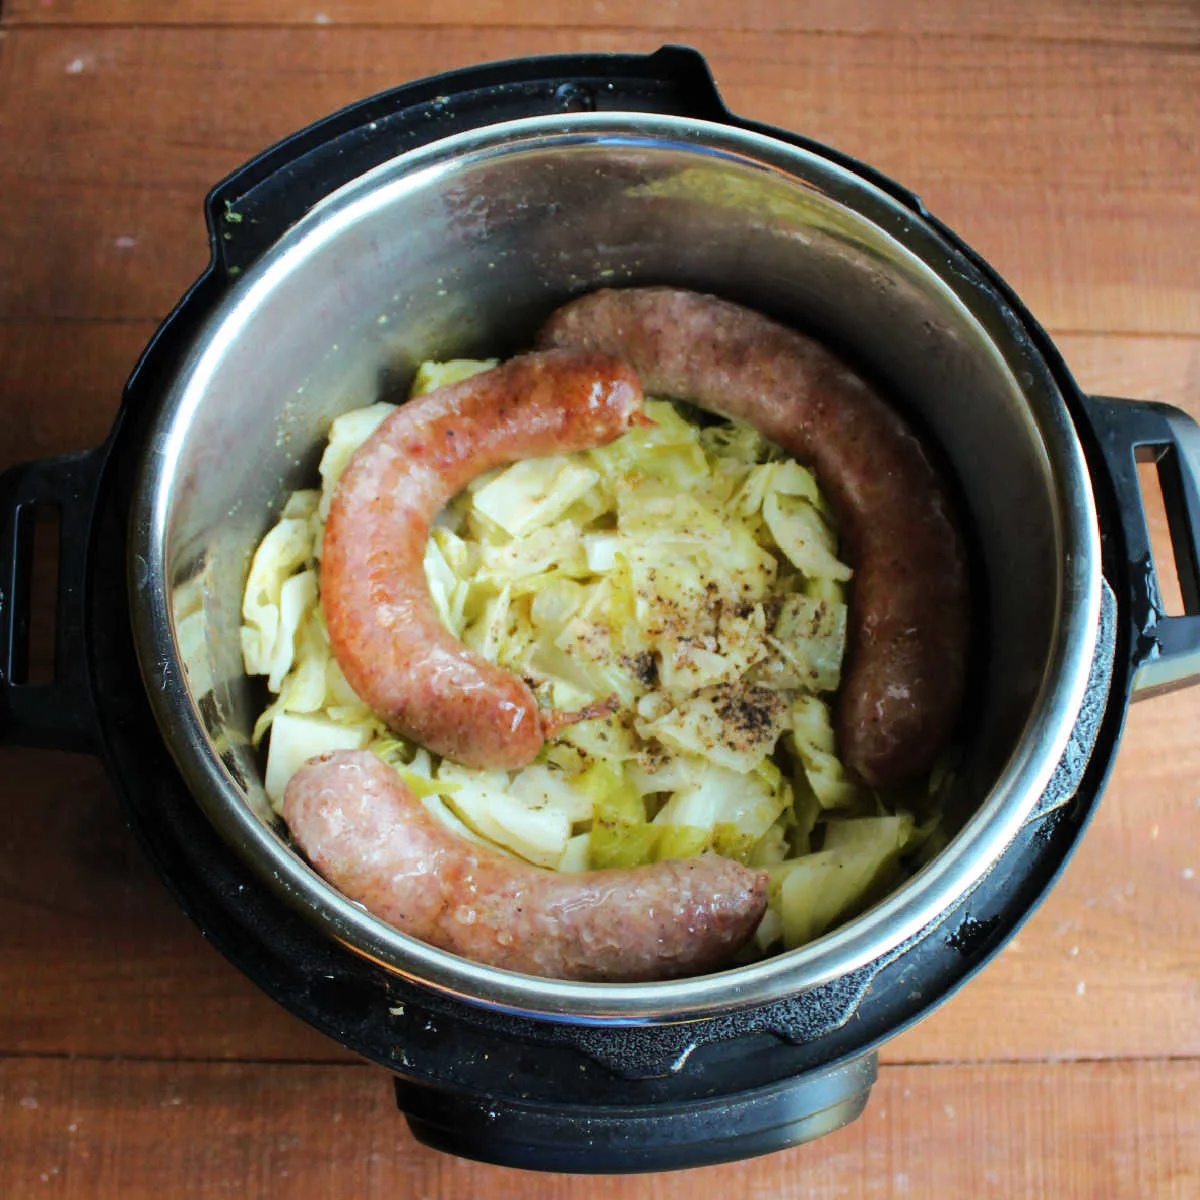 Cooked cabbage, sausage and potatoes in instant pot.